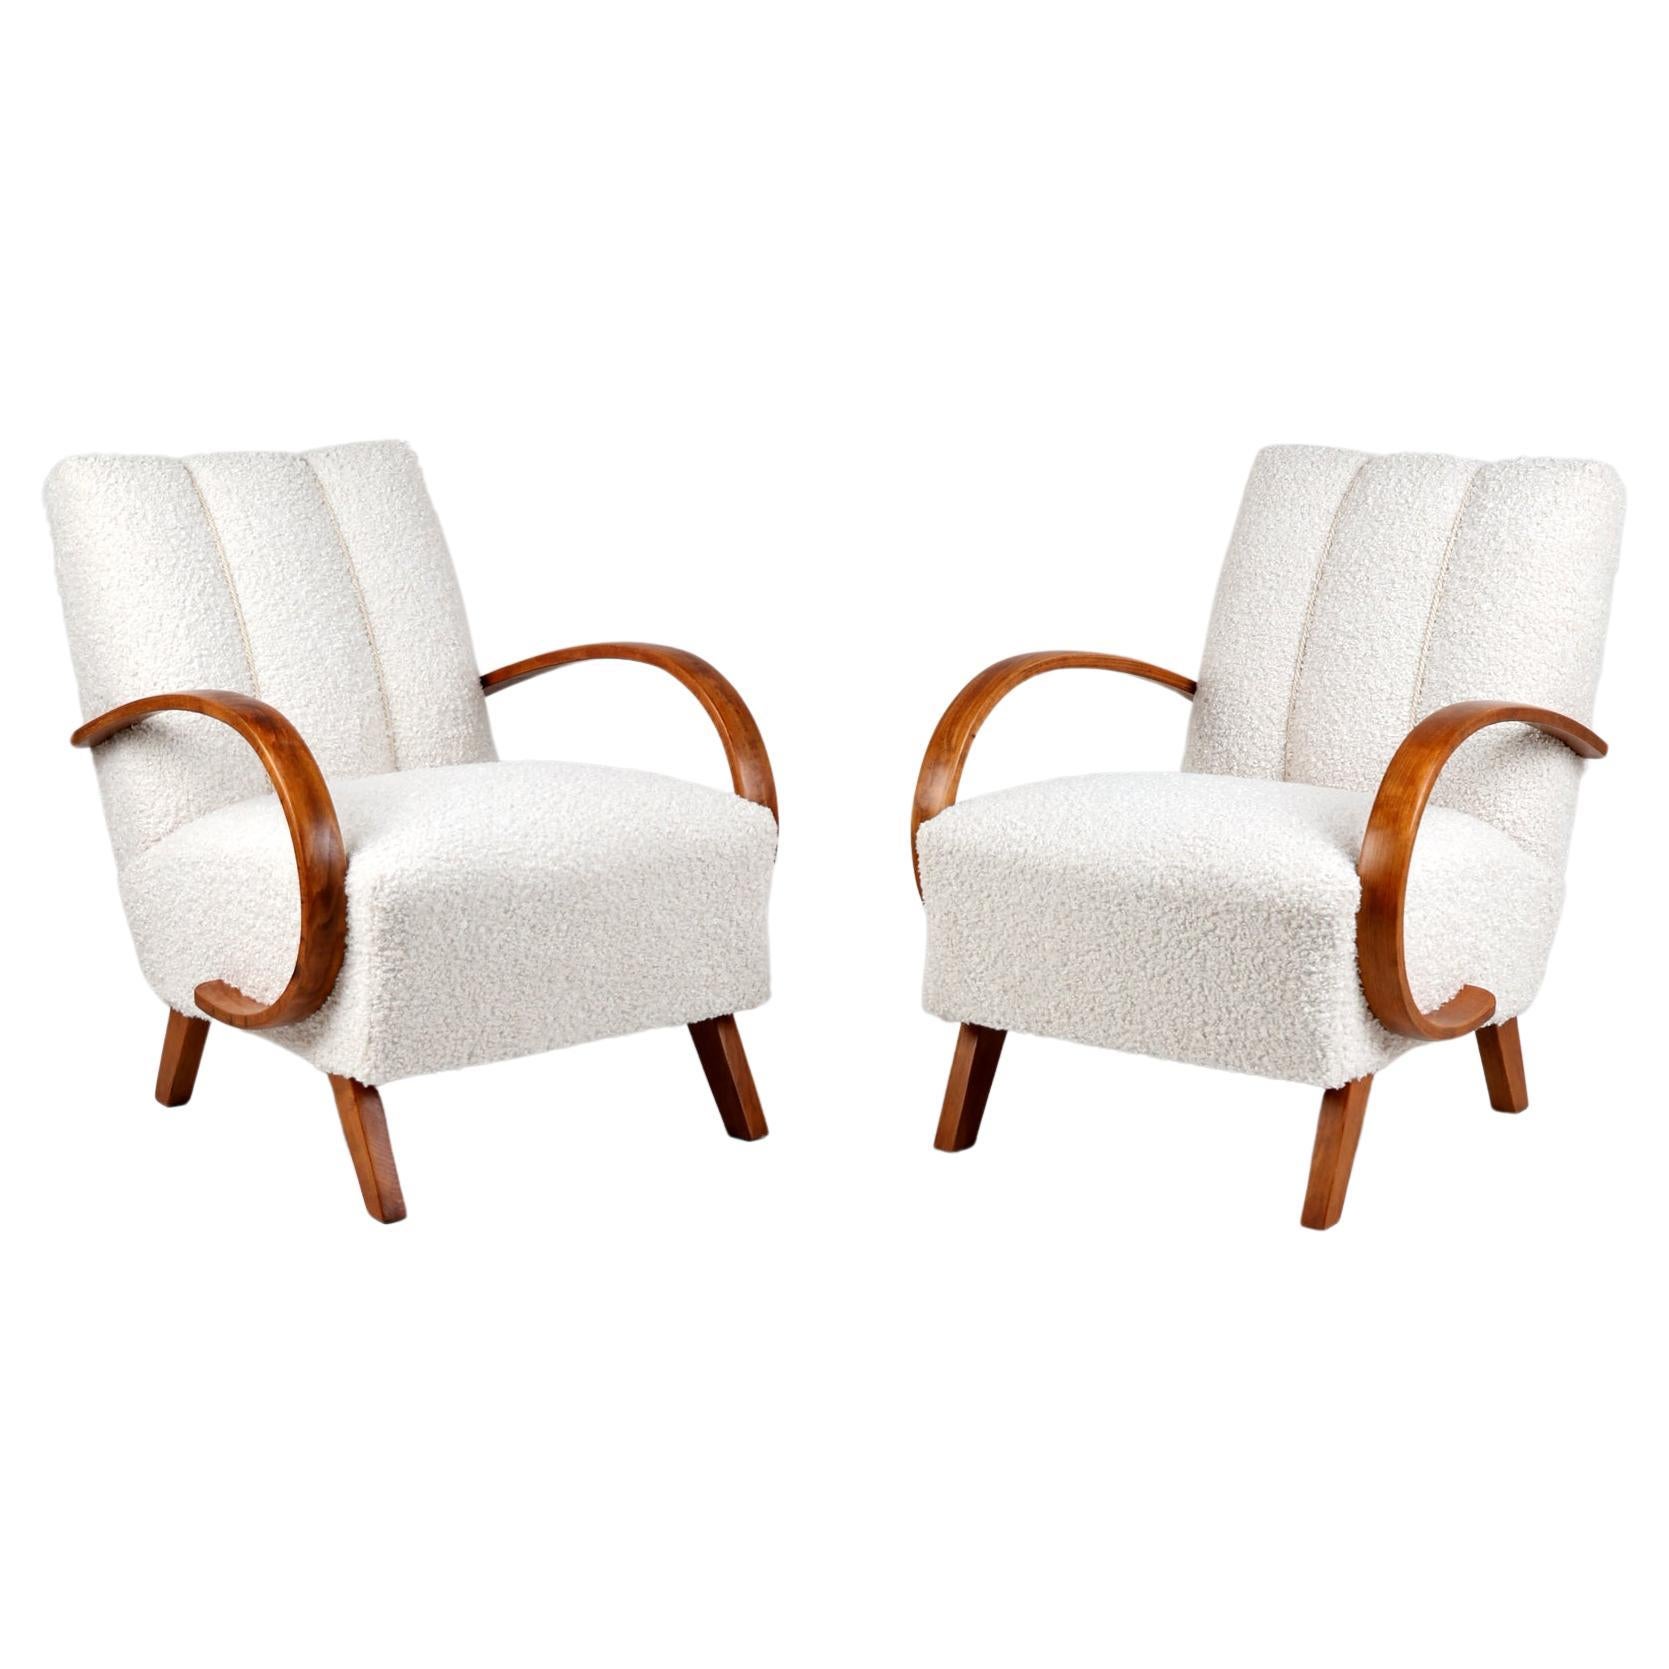 A pair of Armchairs H-410 by Jindrich Halabala from the 1950s